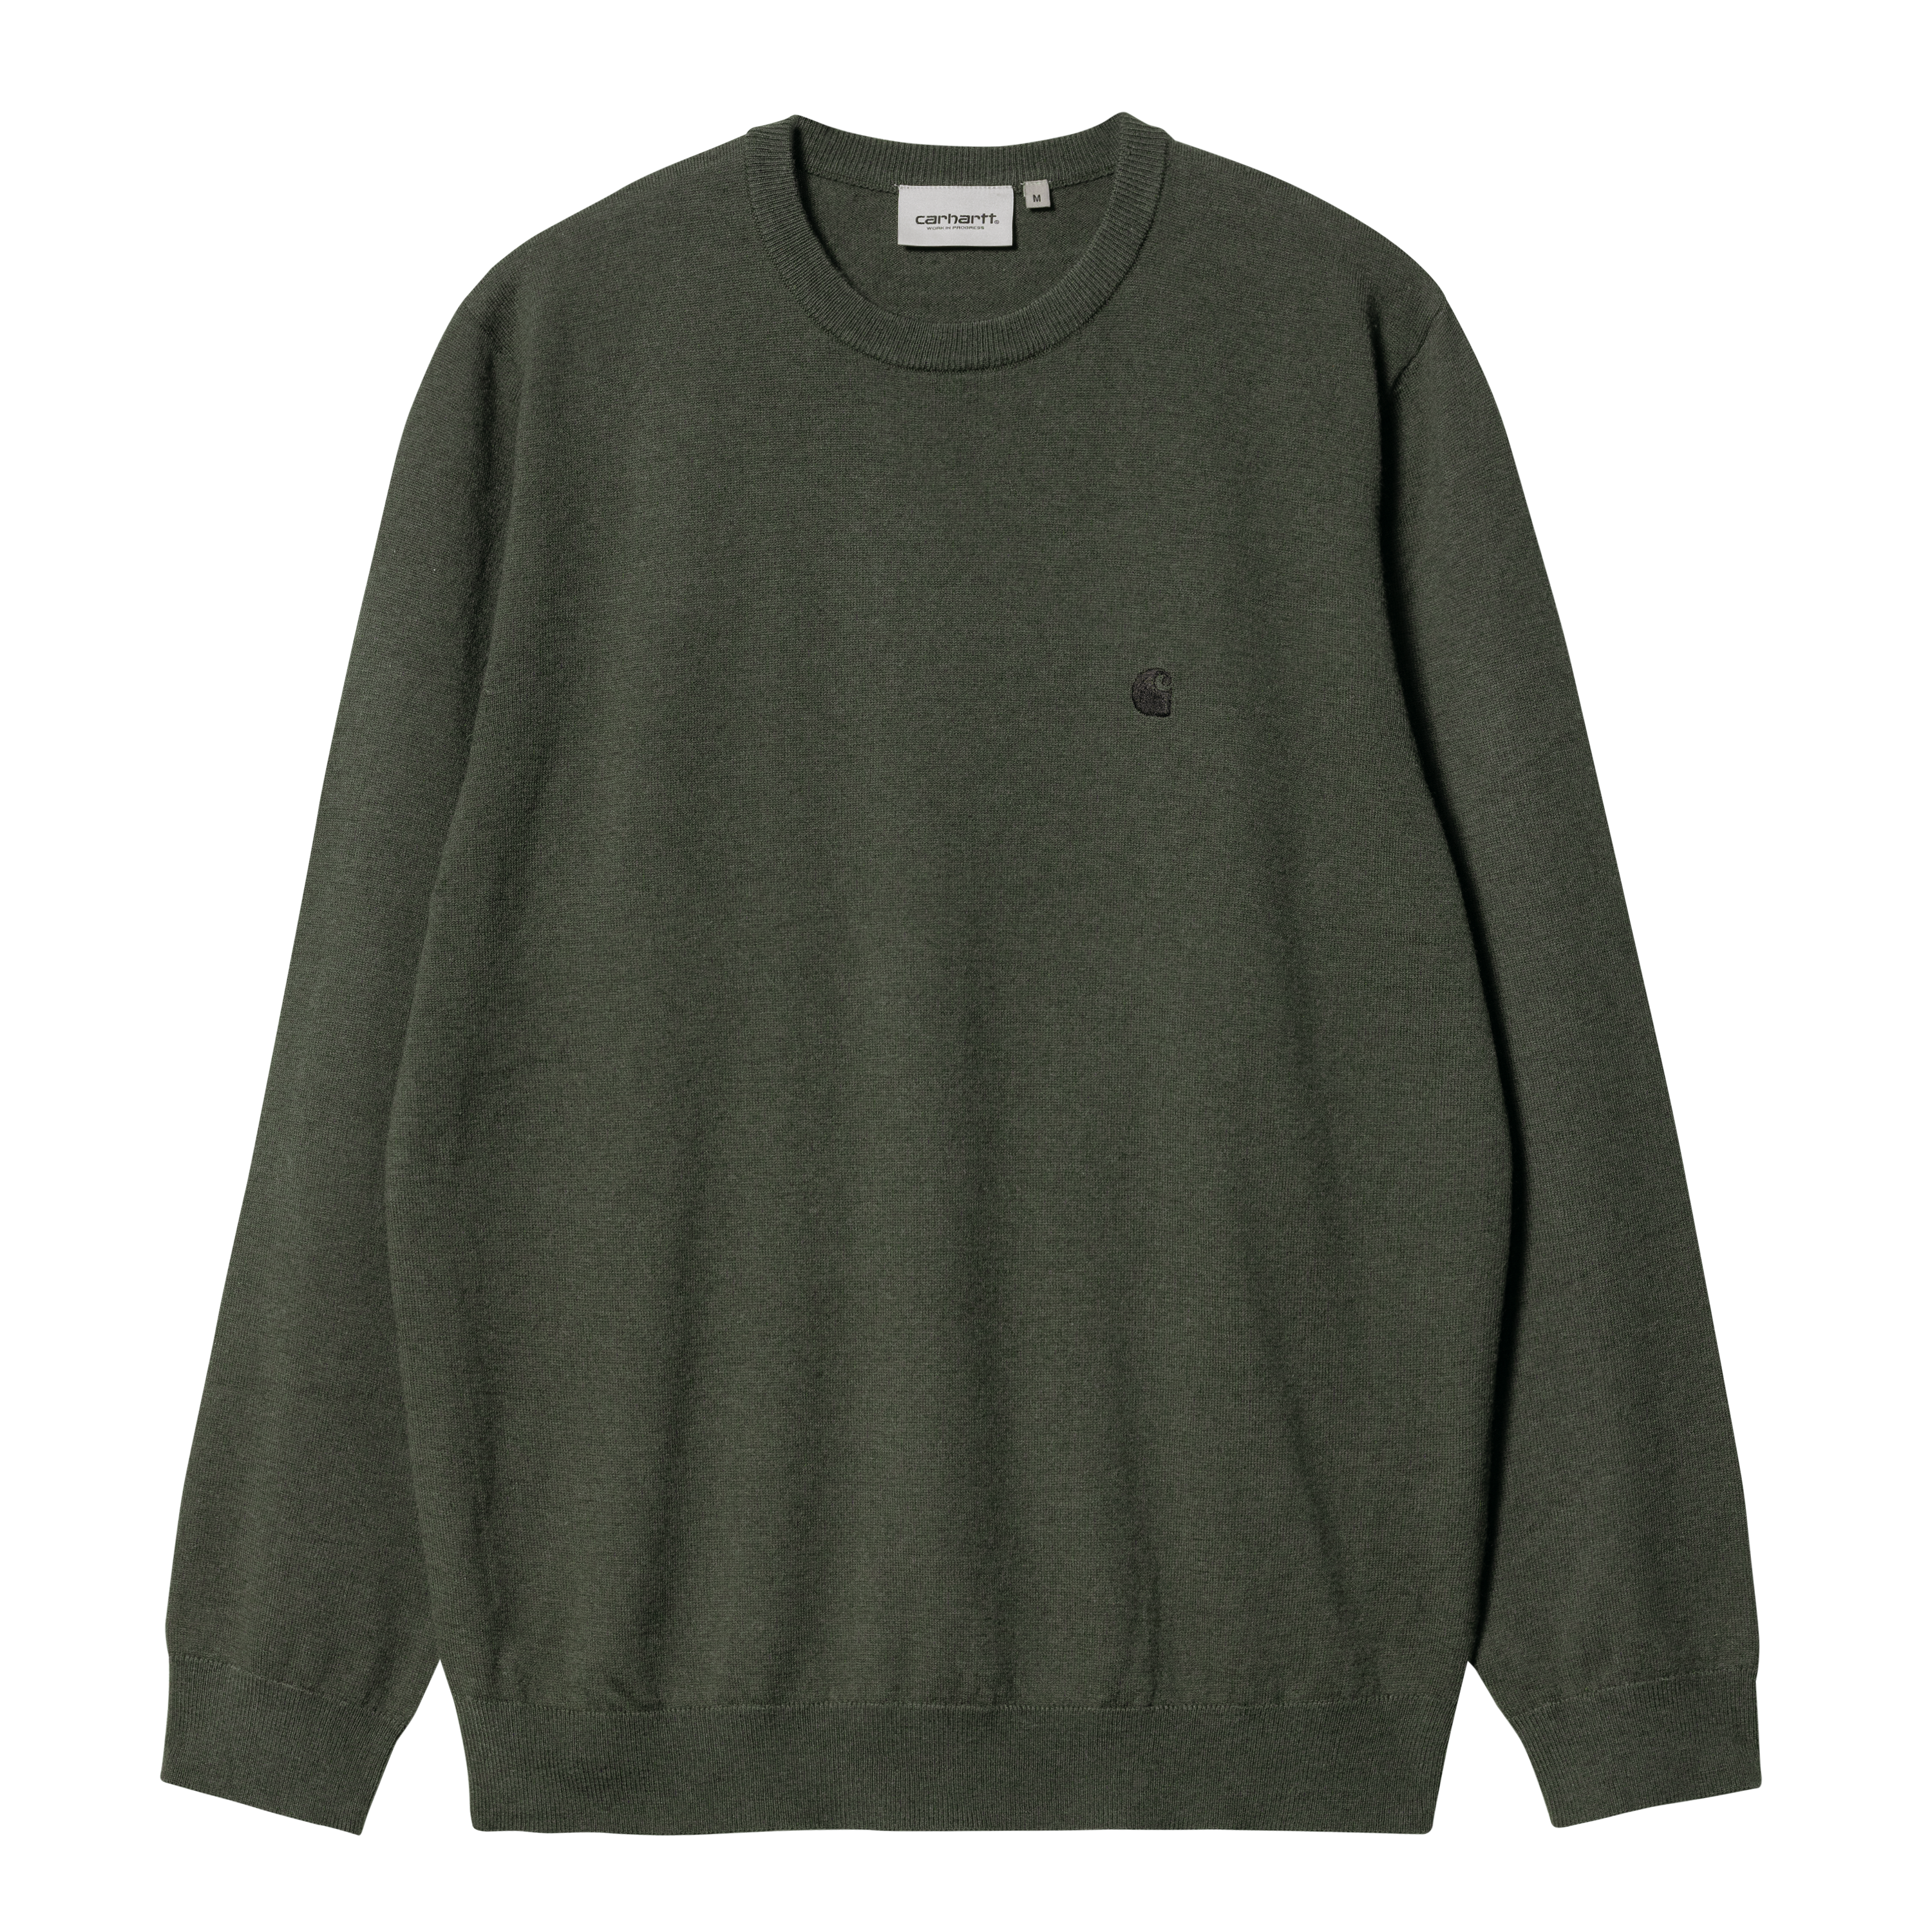 Mailles pour hommes | Carhartt WIP